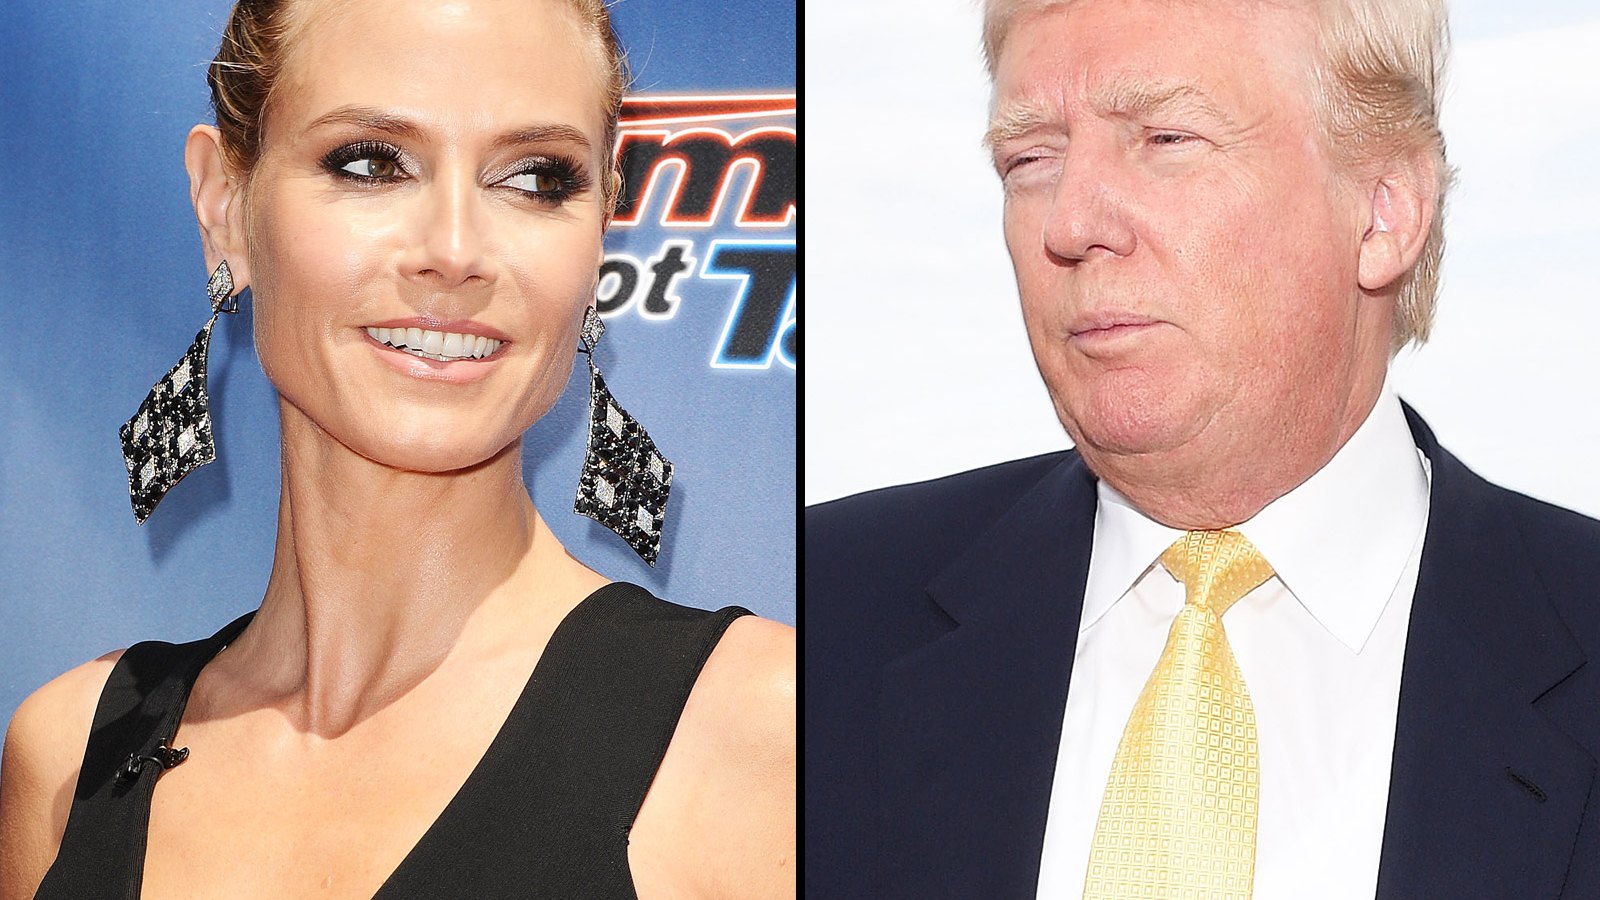 Heidi Klum has reacted to Donald Trump's latest insult, that she's "no